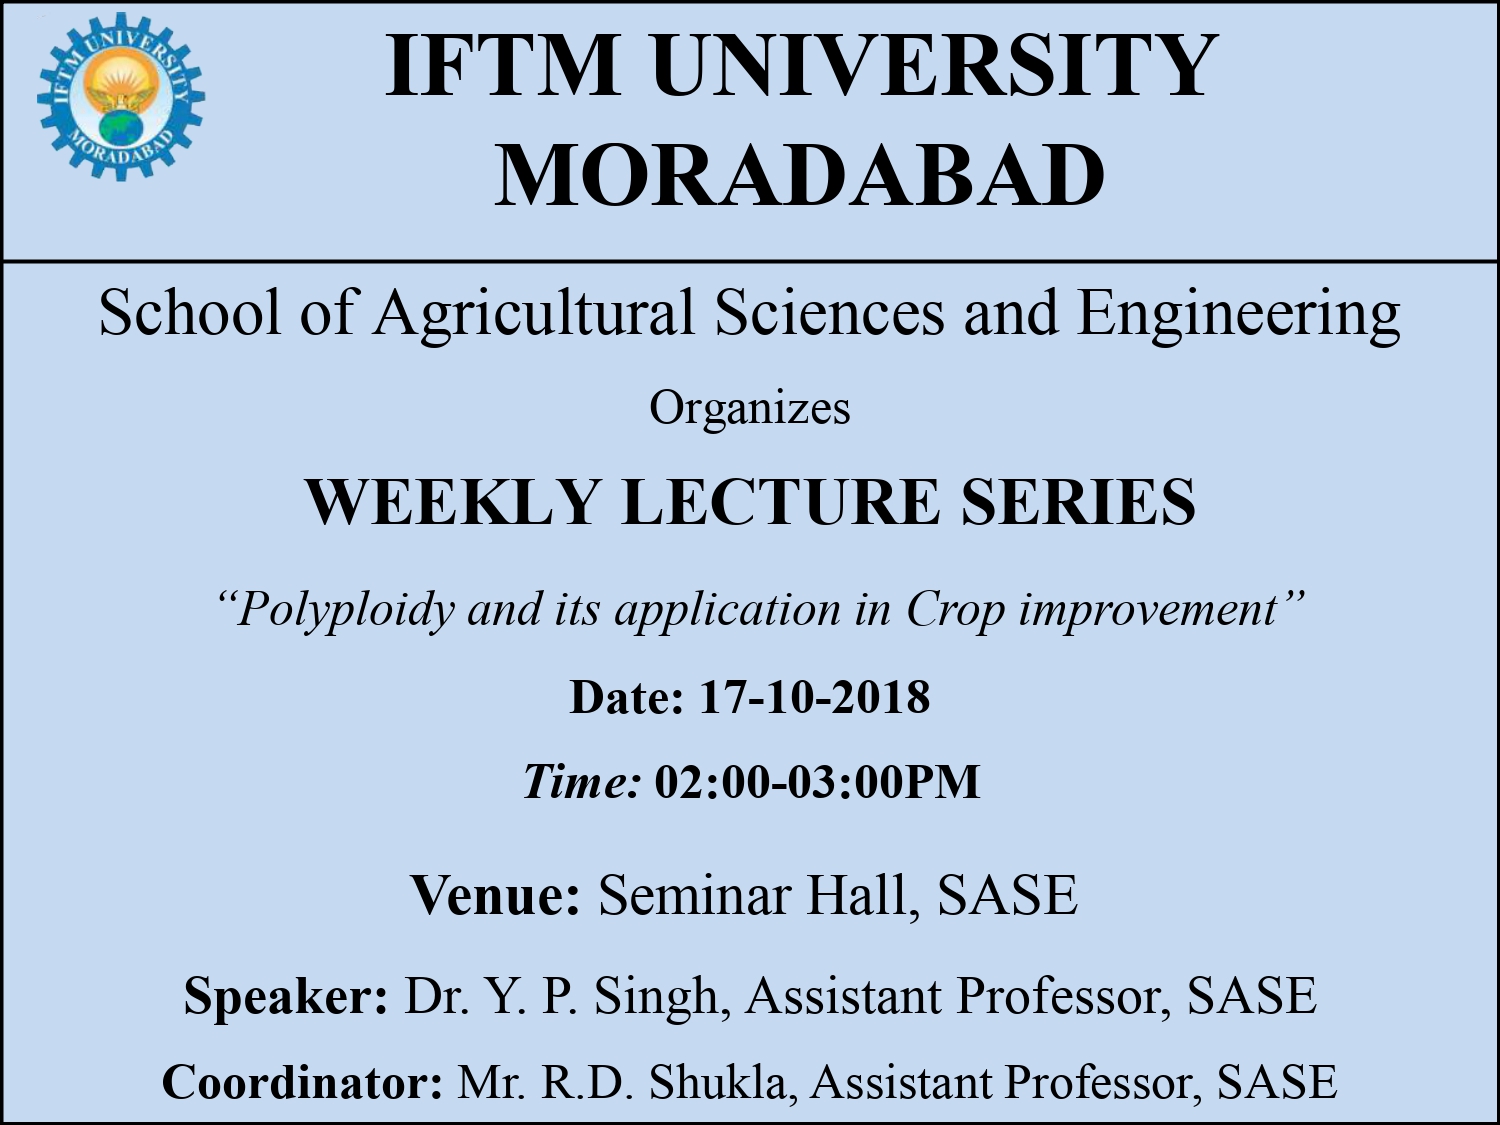 Weekly Lecture Series: “Polyploidy and its application in Crop improvement”